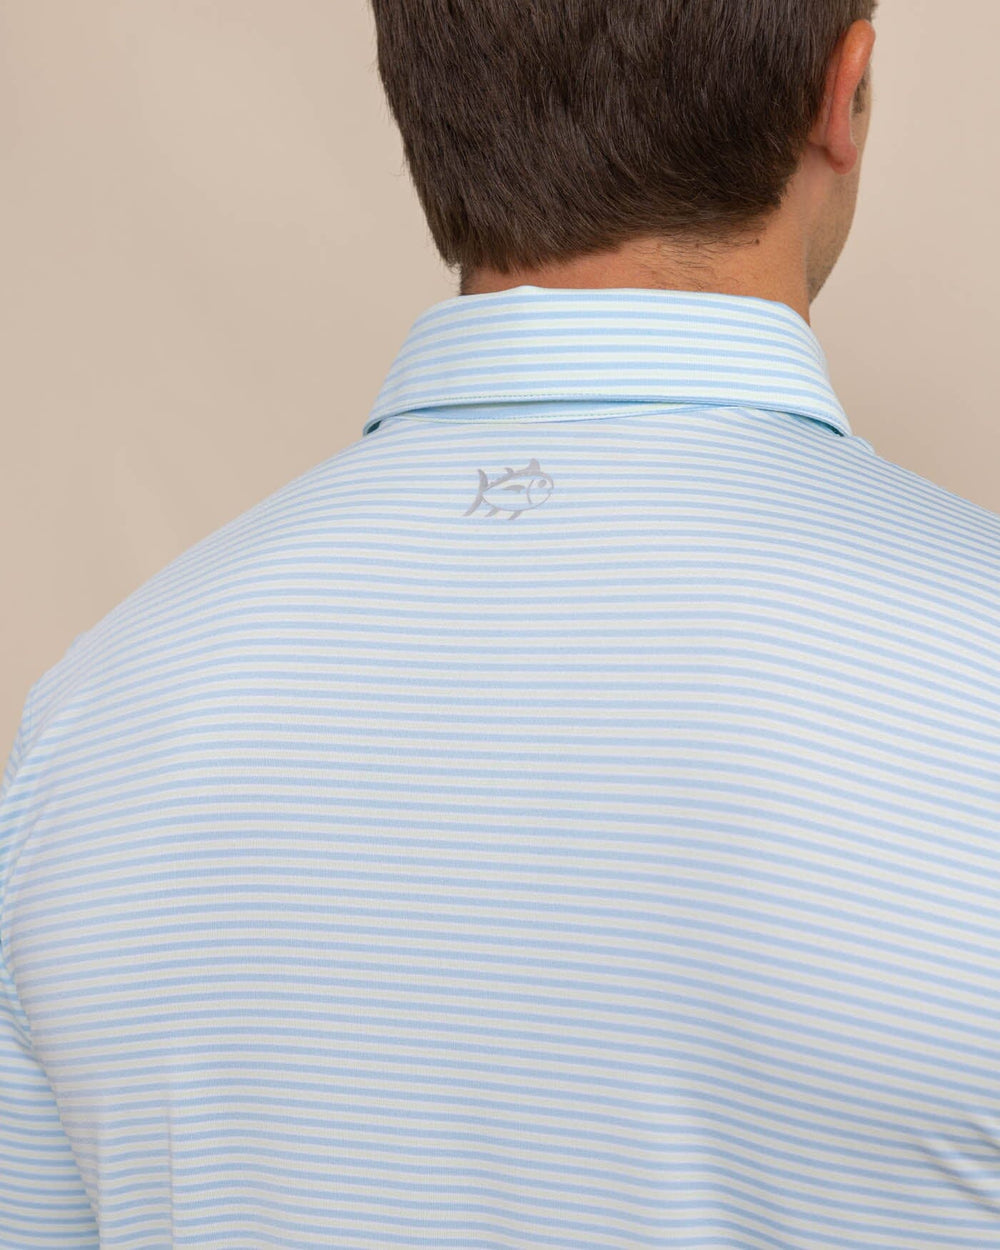 The detail view of the Southern Tide Driver Verdae Stripe Polo by Southern Tide - Seacrest Green